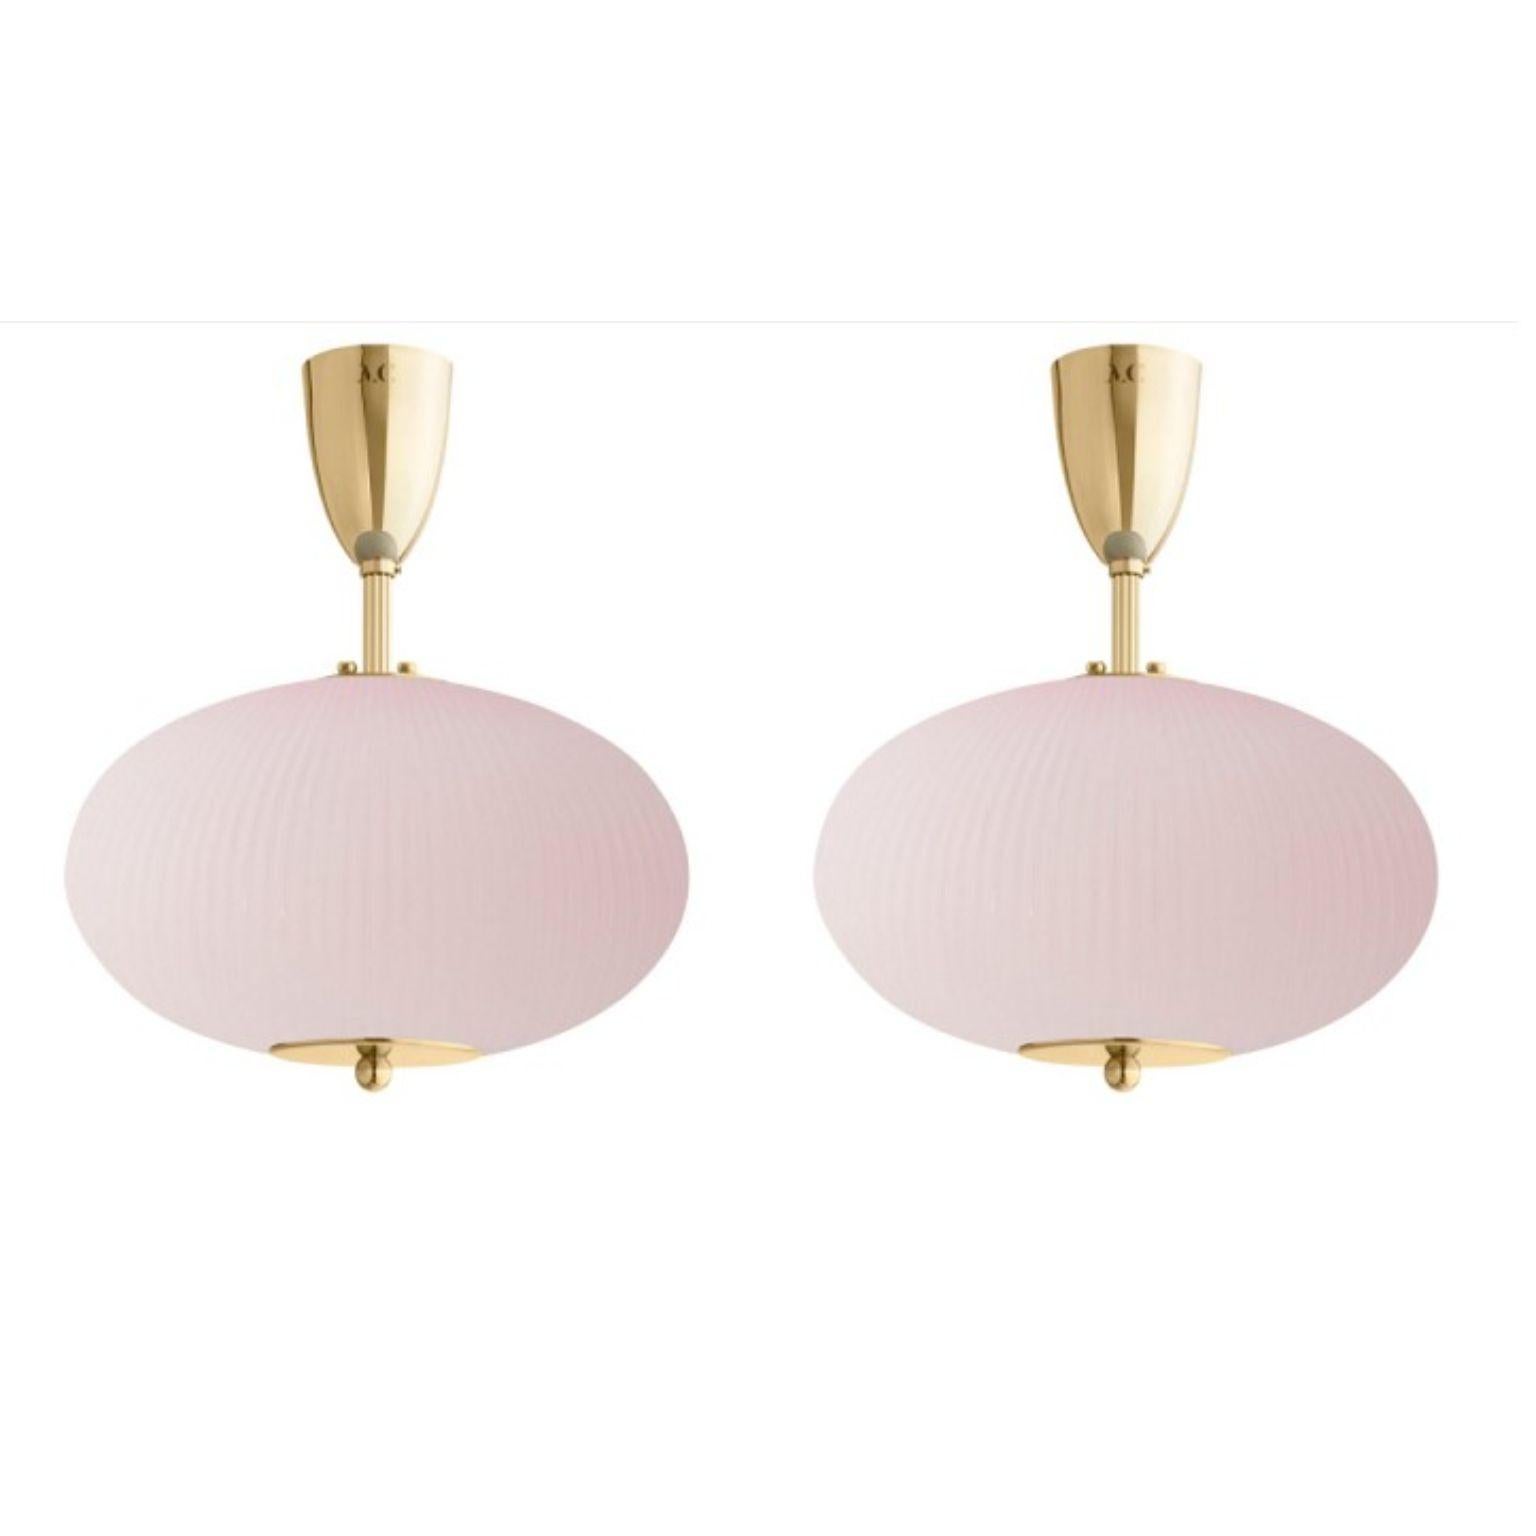 Ceiling lamp China 07 by Magic Circus Editions
Dimensions: H 40 x W 32 x D 32 cm
Materials: Brass, mouth blown glass sculpted with a diamond saw
Colour: soft rose

Available finishes: Brass, nickel
Available colours: enamel soft white, soft